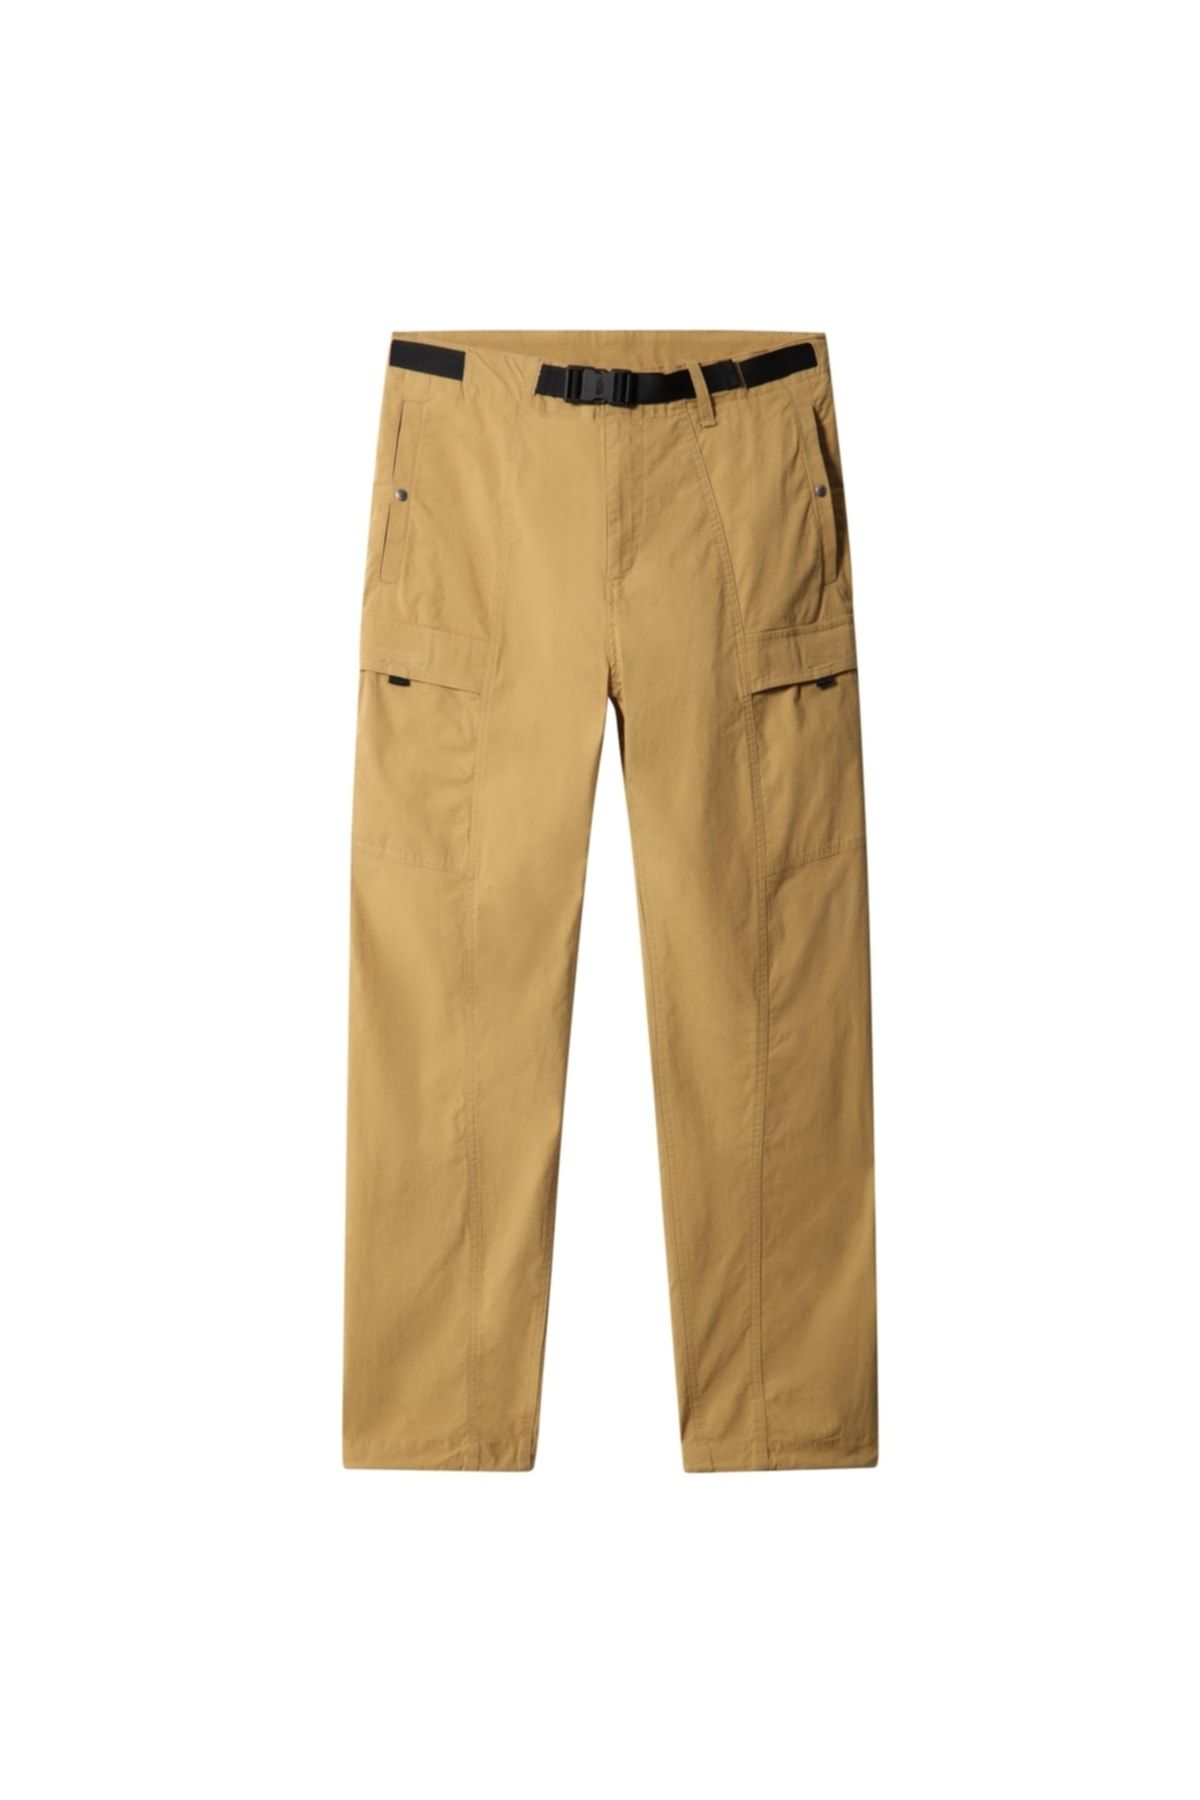 The North Face M Rıpstop Cargo Easy Pant- Nf0a5j4hzsf1